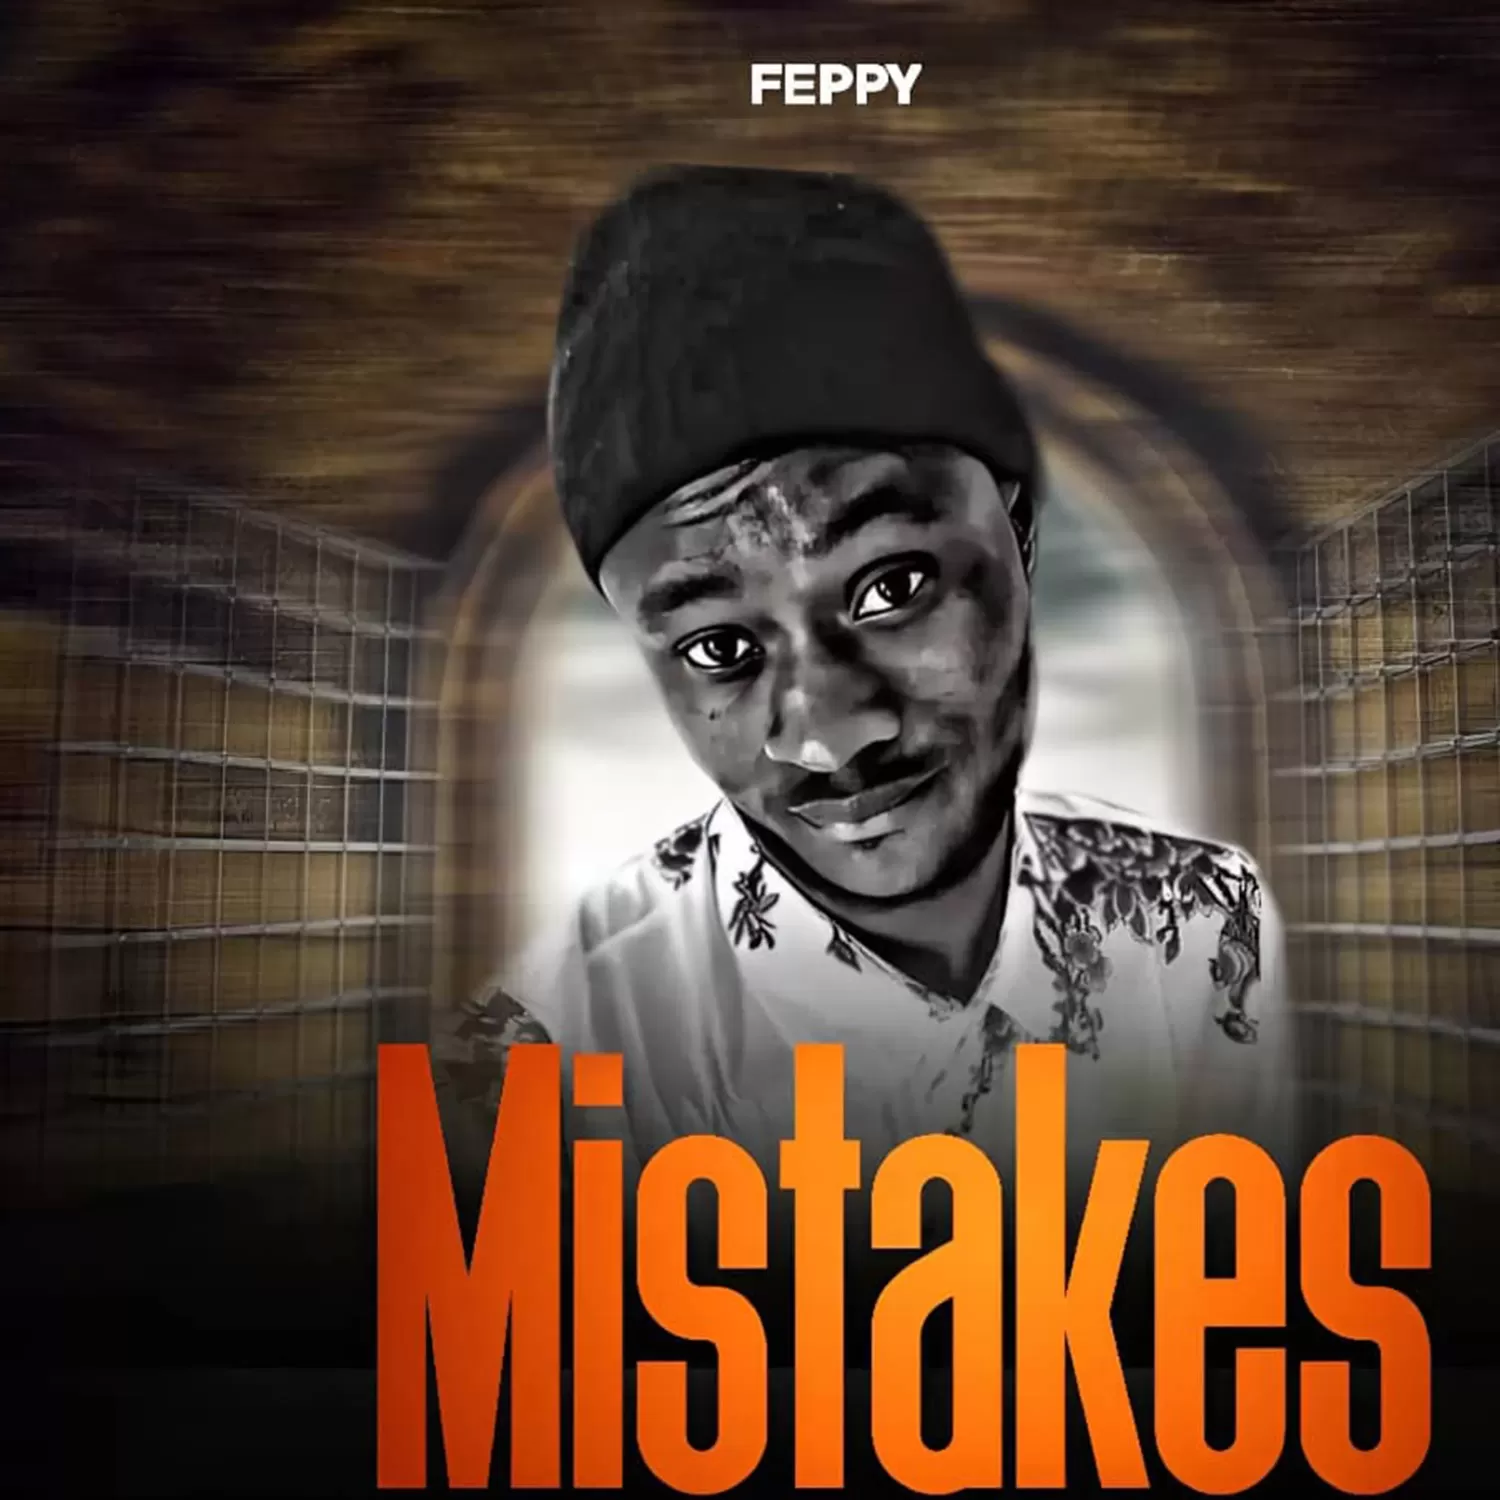 Mistakes by Feppy